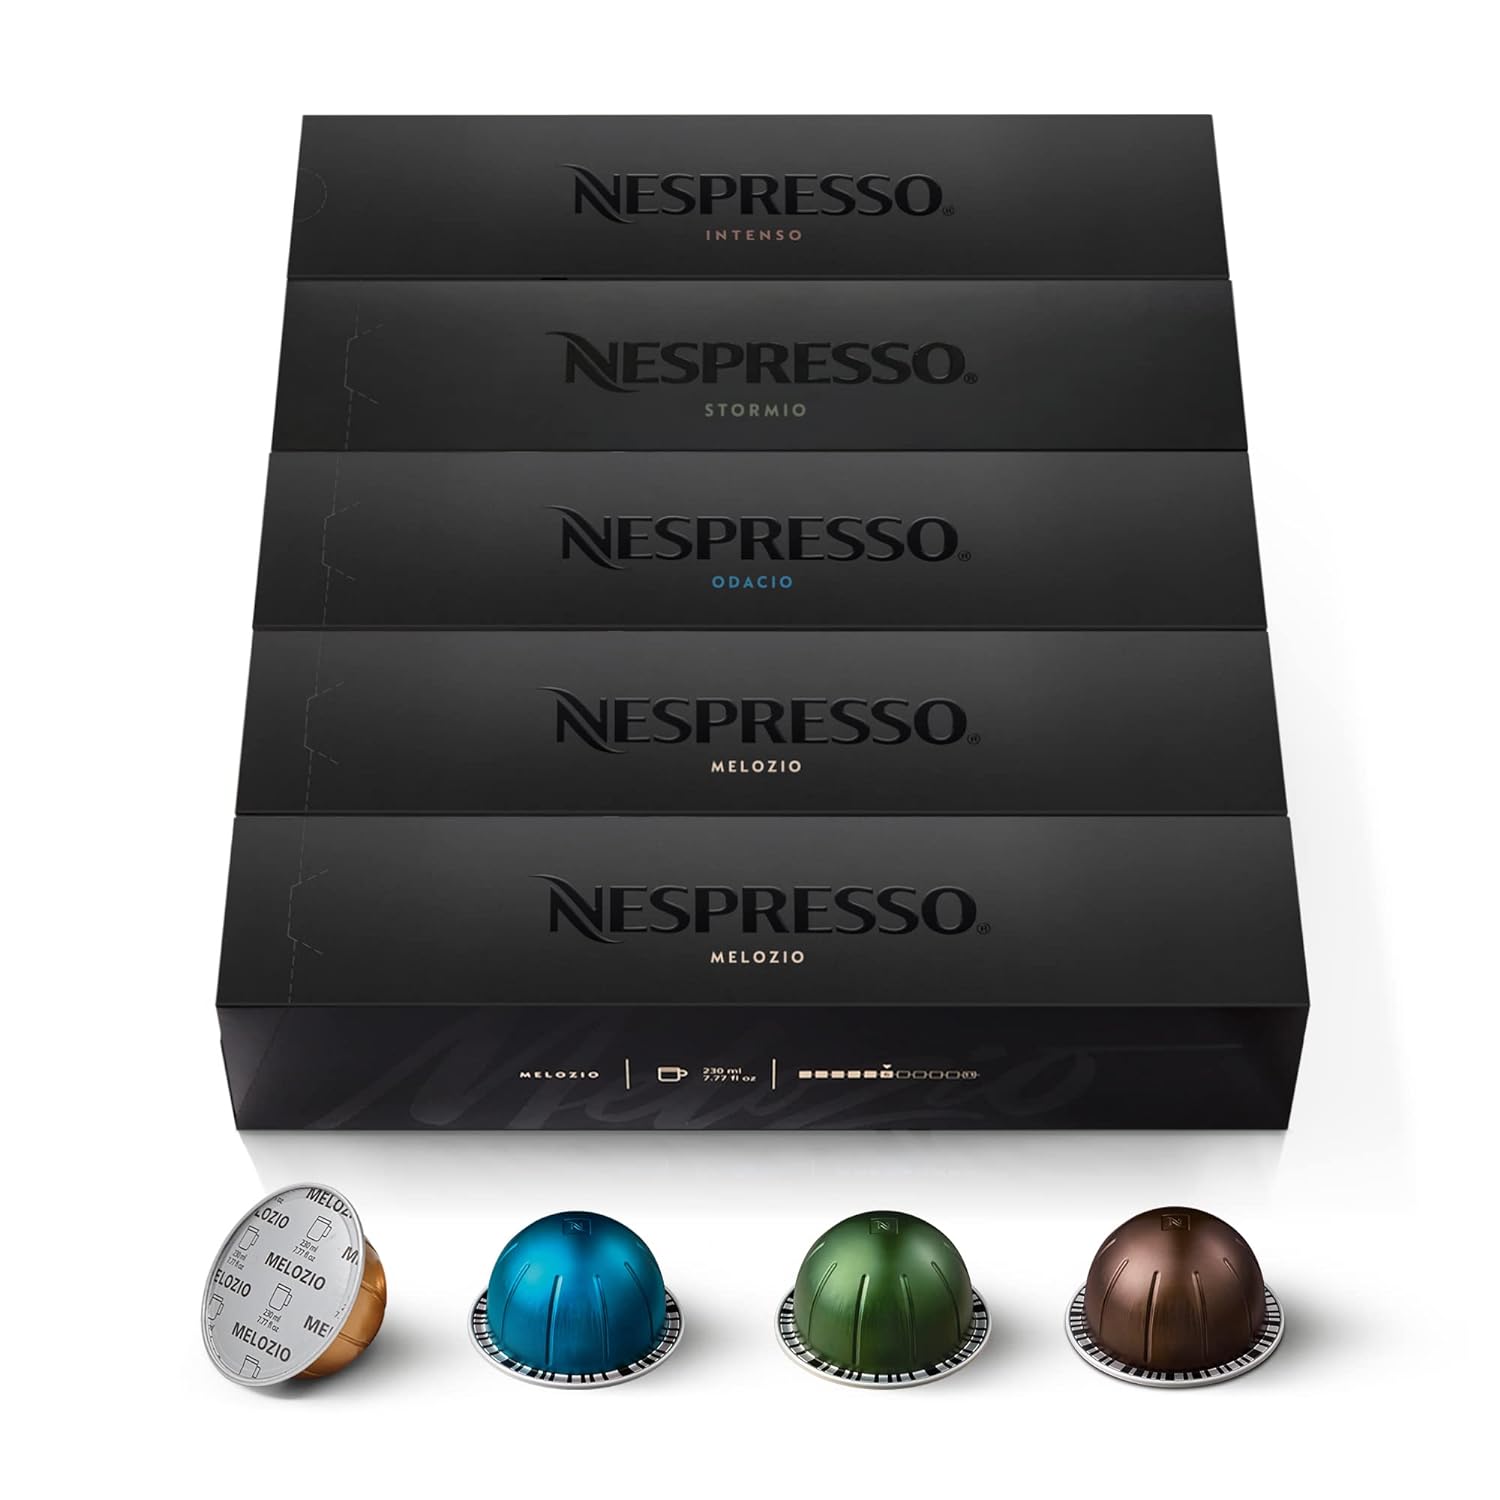 NESPRESSO Vertuo, Selection of Signature Coffees (230 ml), Medium to Darker Roasts, Compatible with Vertuo Capsule Machines, Capsule Set of 50 Coffee Capsules